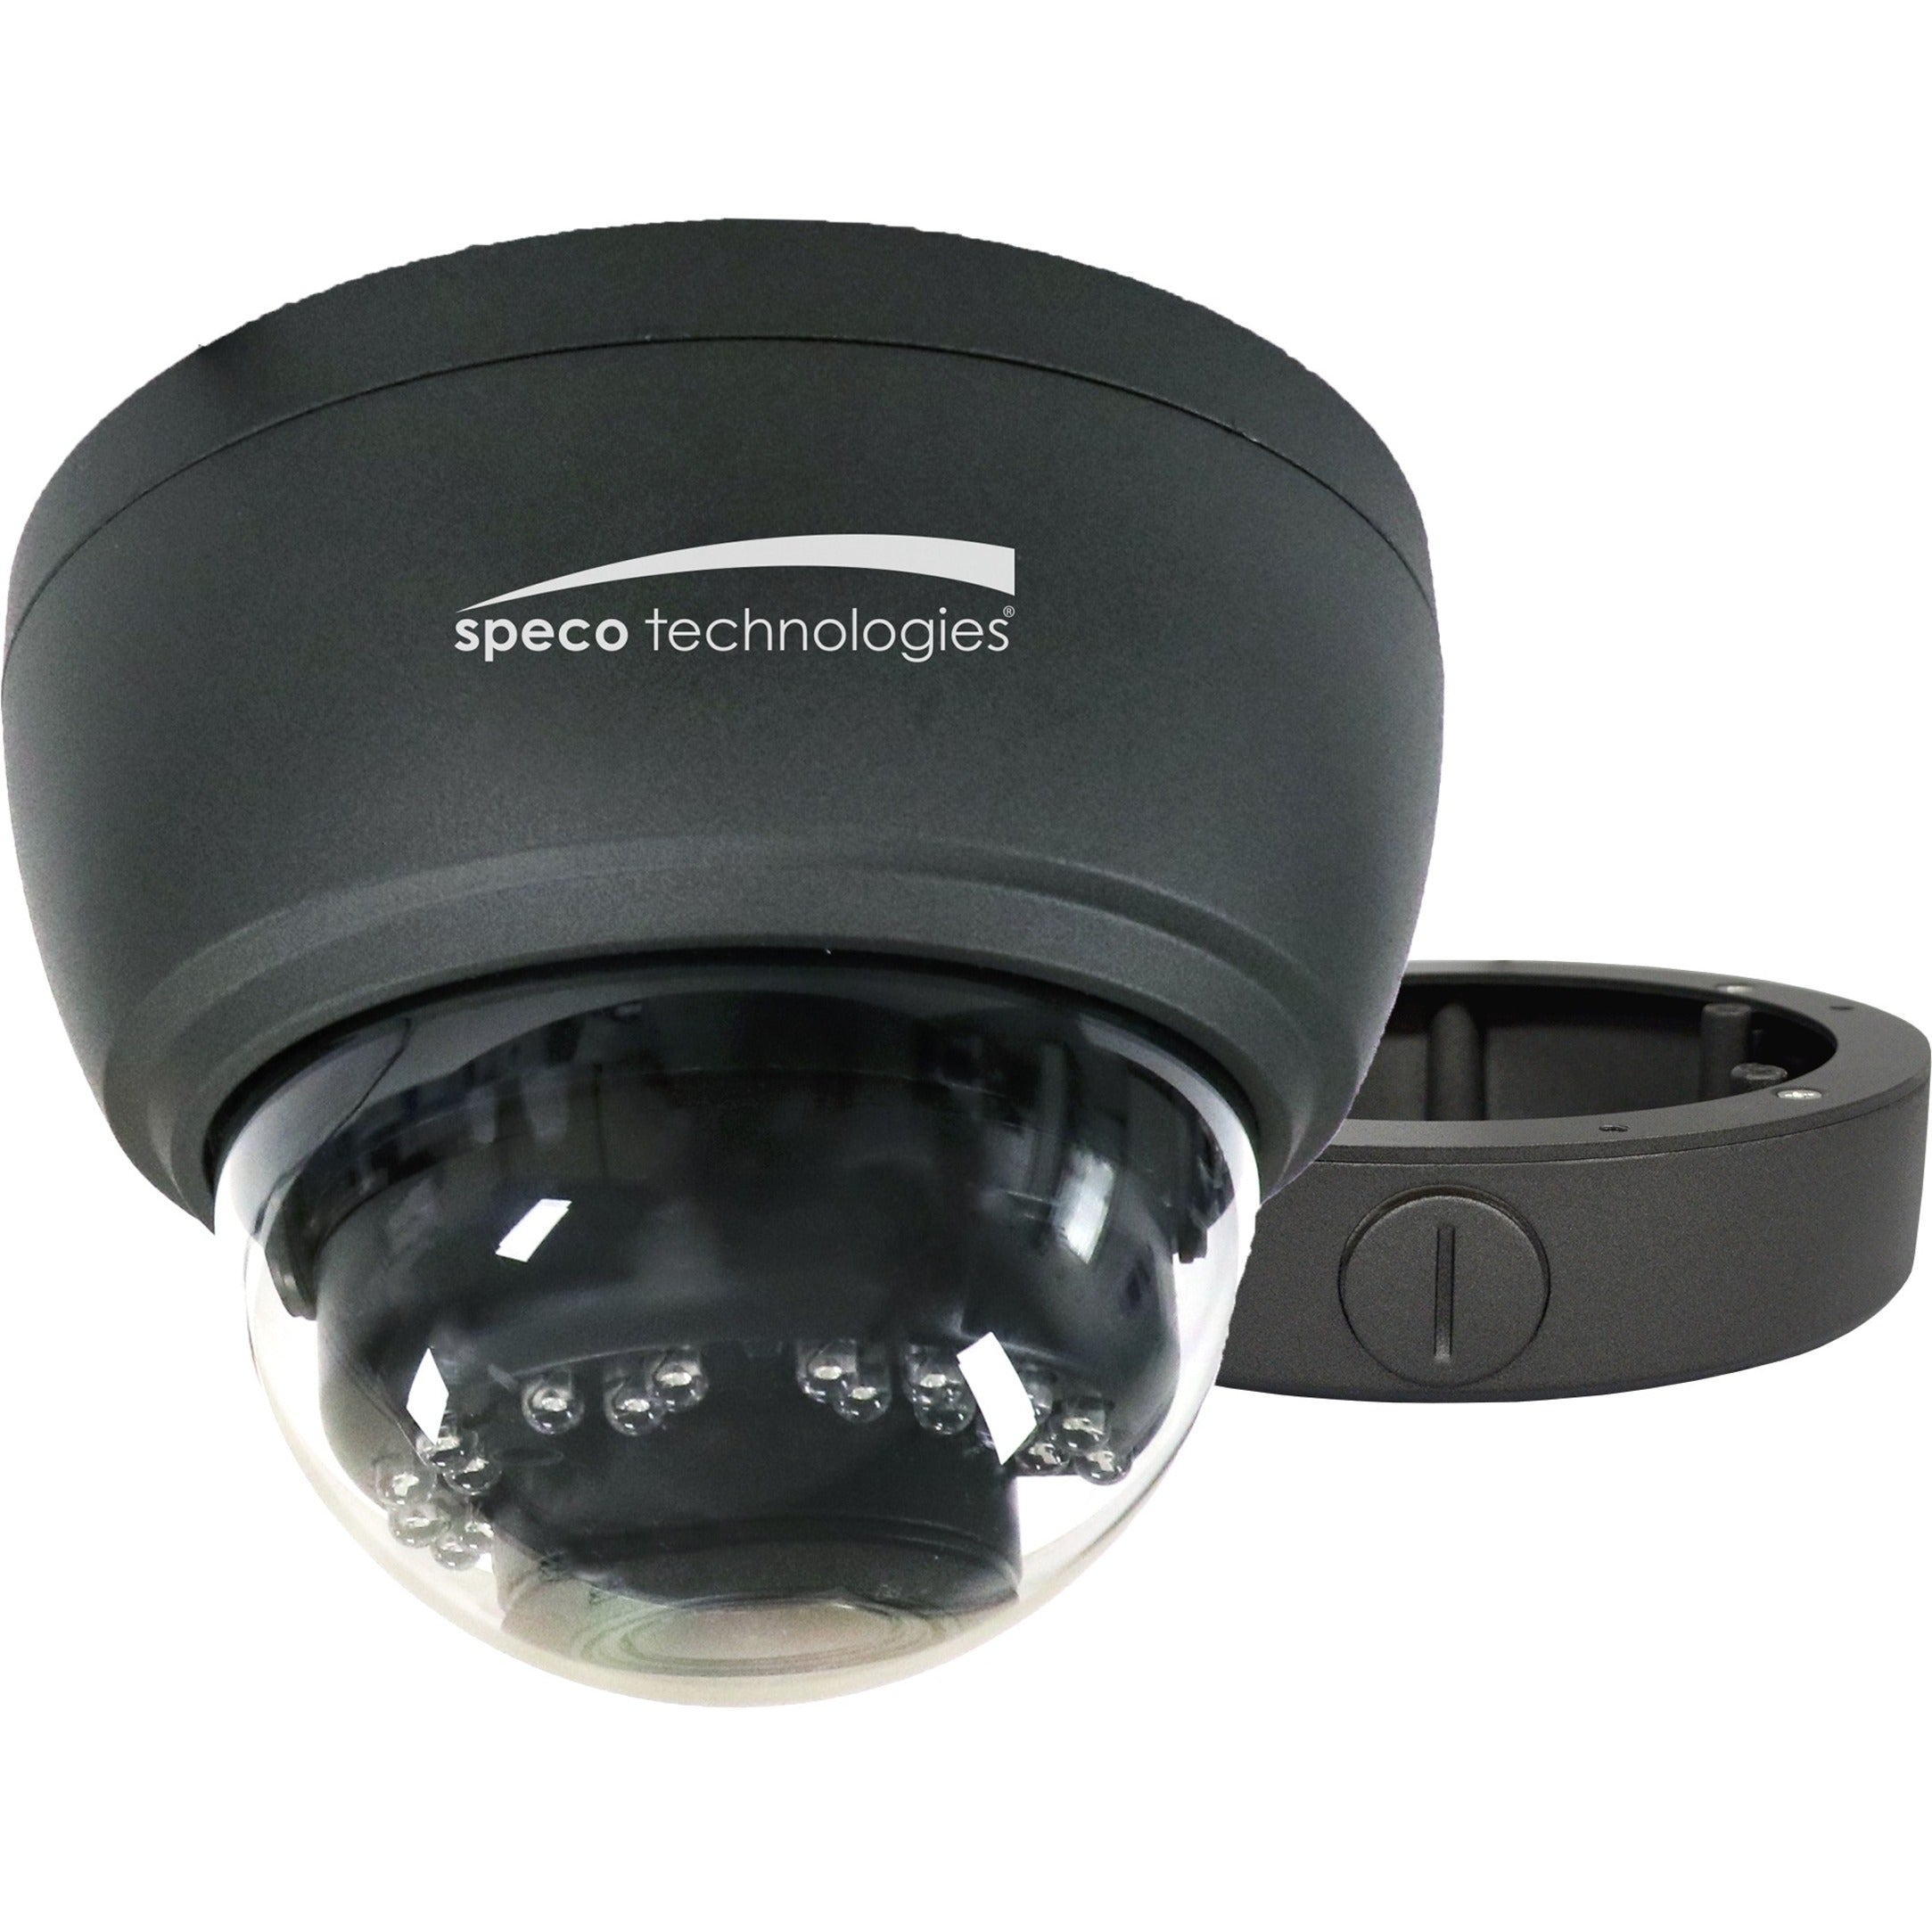 Speco HT7250TM 2MP Intensifier Dome Camera with Included Junction Box, Full HD, Motion Detection, Weather Resistant